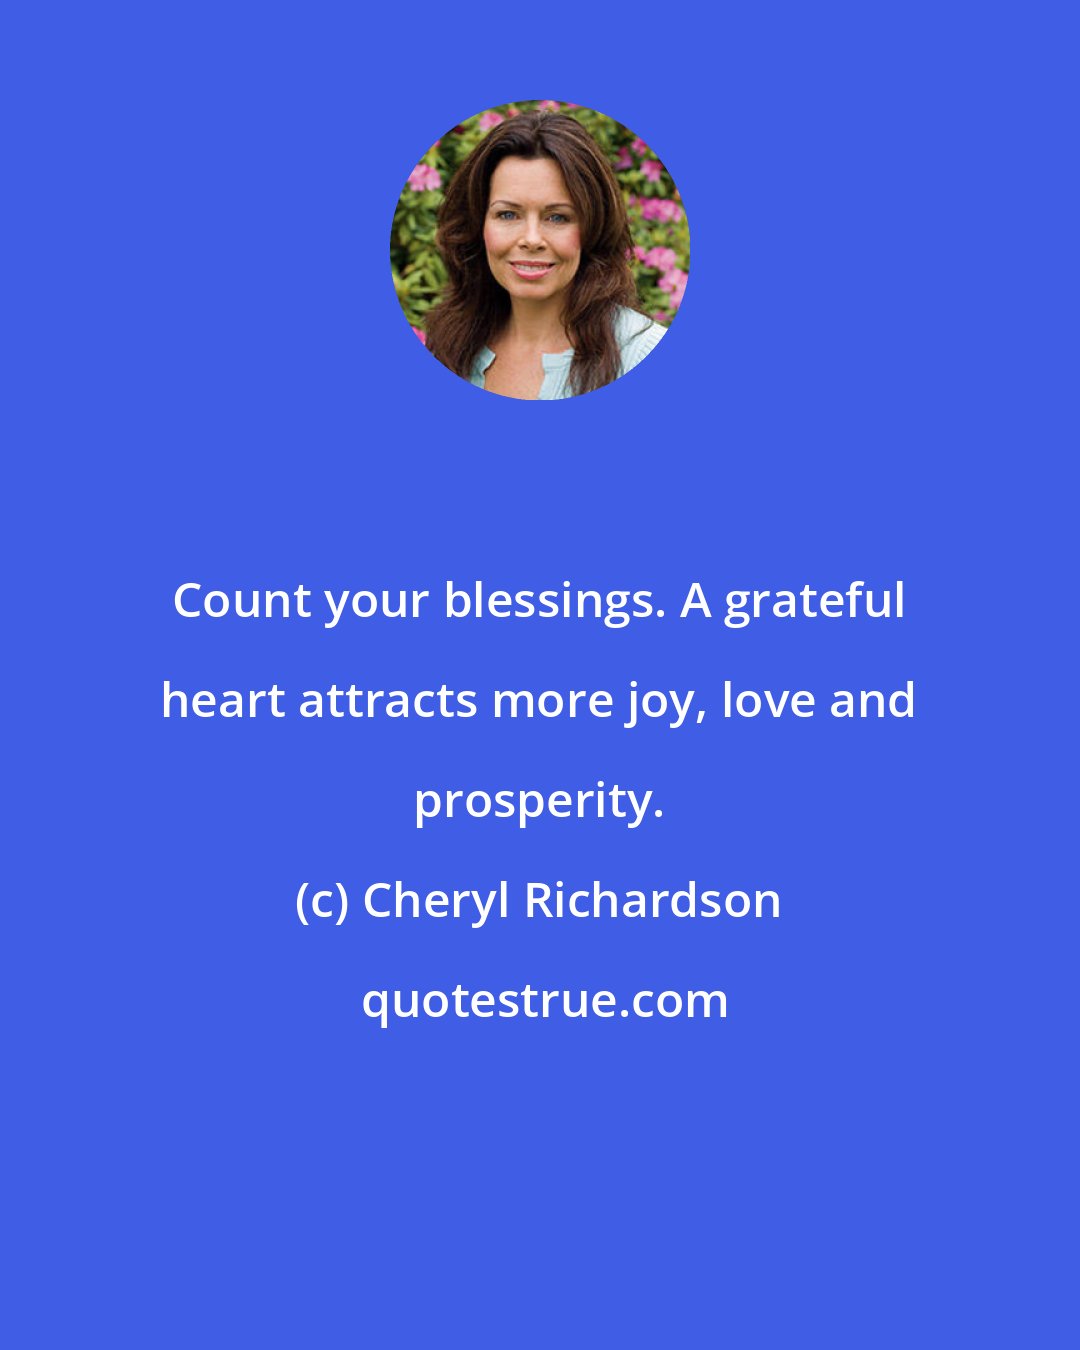 Cheryl Richardson: Count your blessings. A grateful heart attracts more joy, love and prosperity.